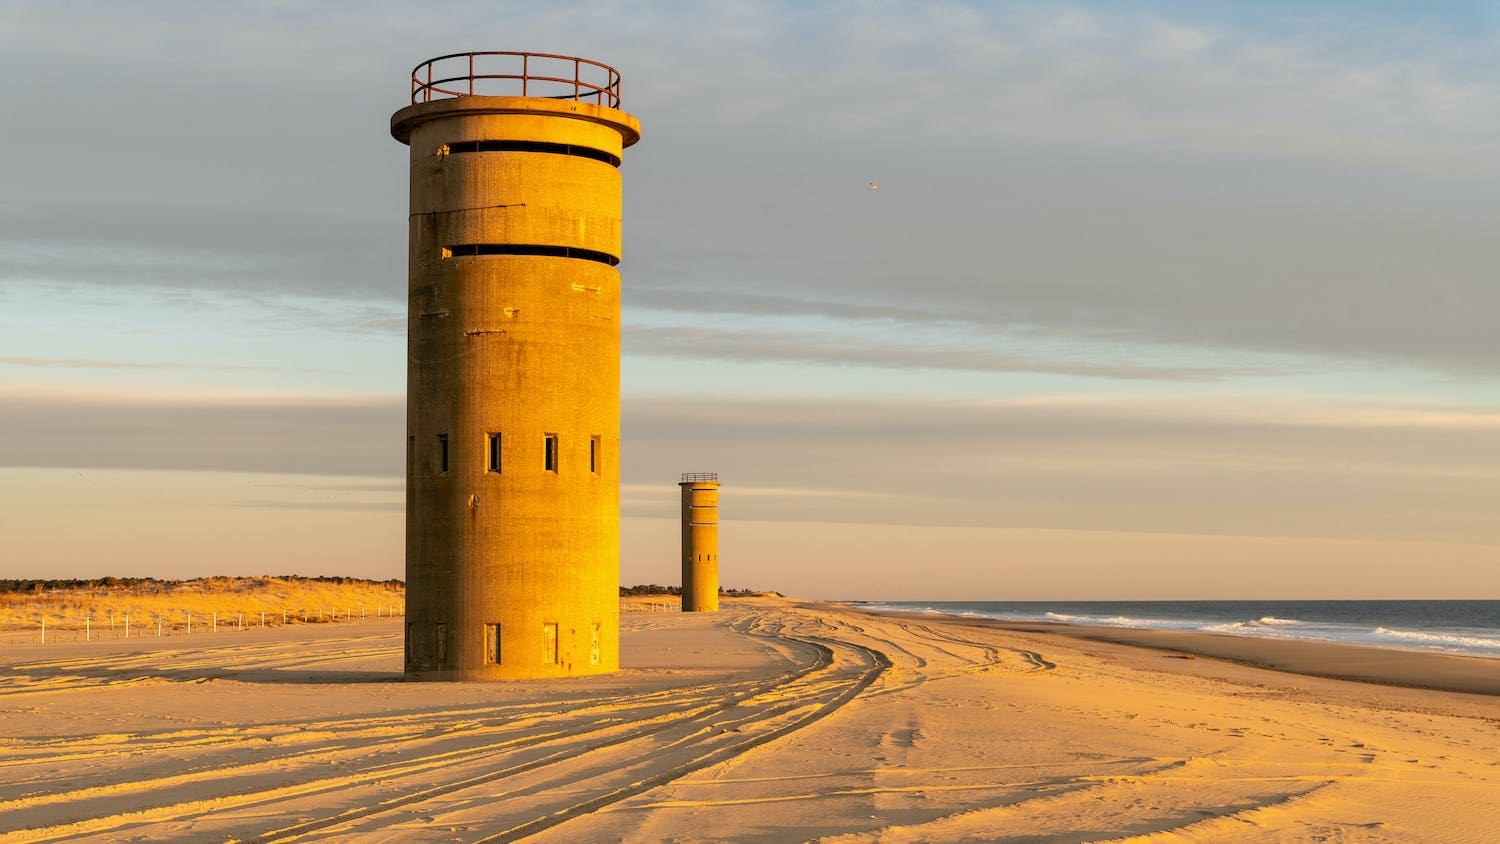 The iconic fire towers along the Sussex coast. (Delaware Division of Parks and Recreation)